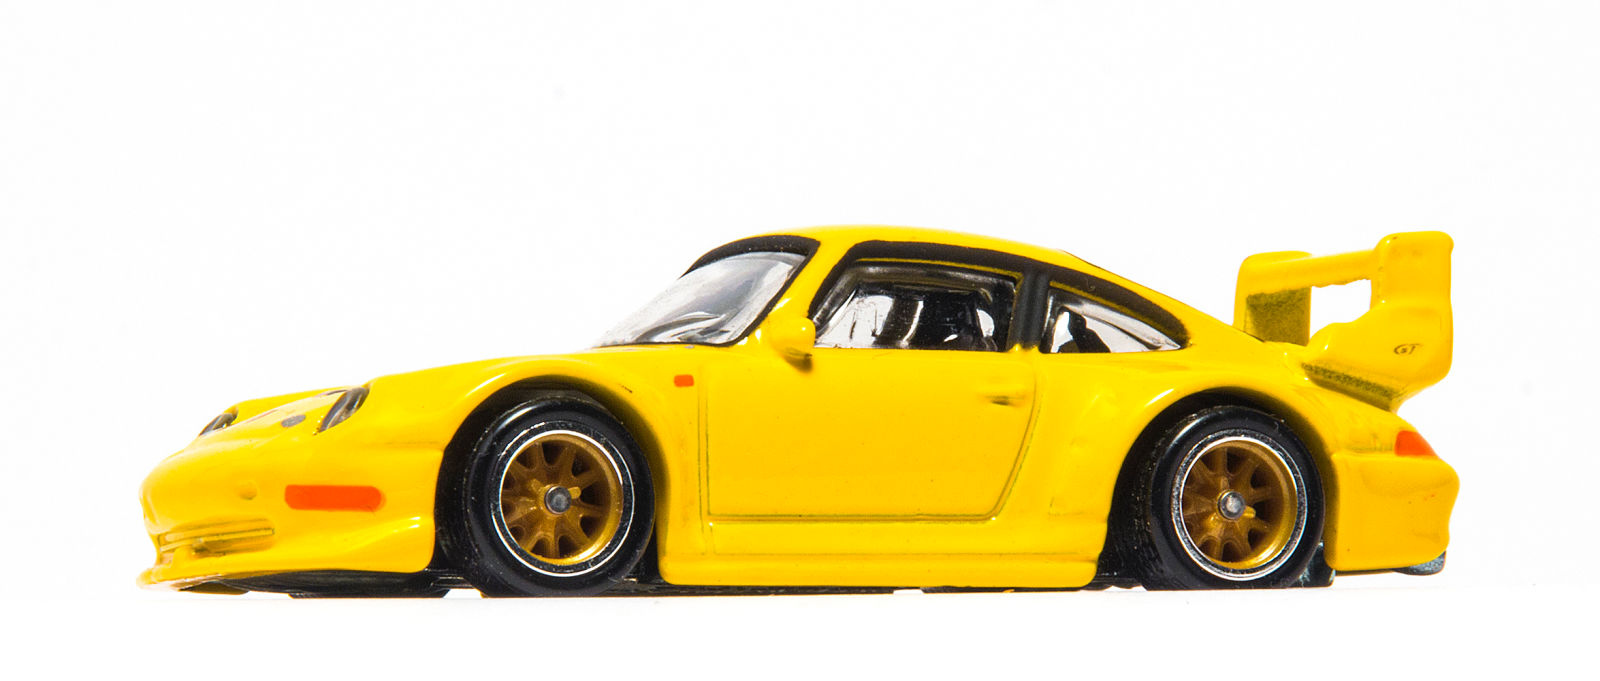 Illustration for article titled Teutonic Tuesday - Porsche 993 GT2